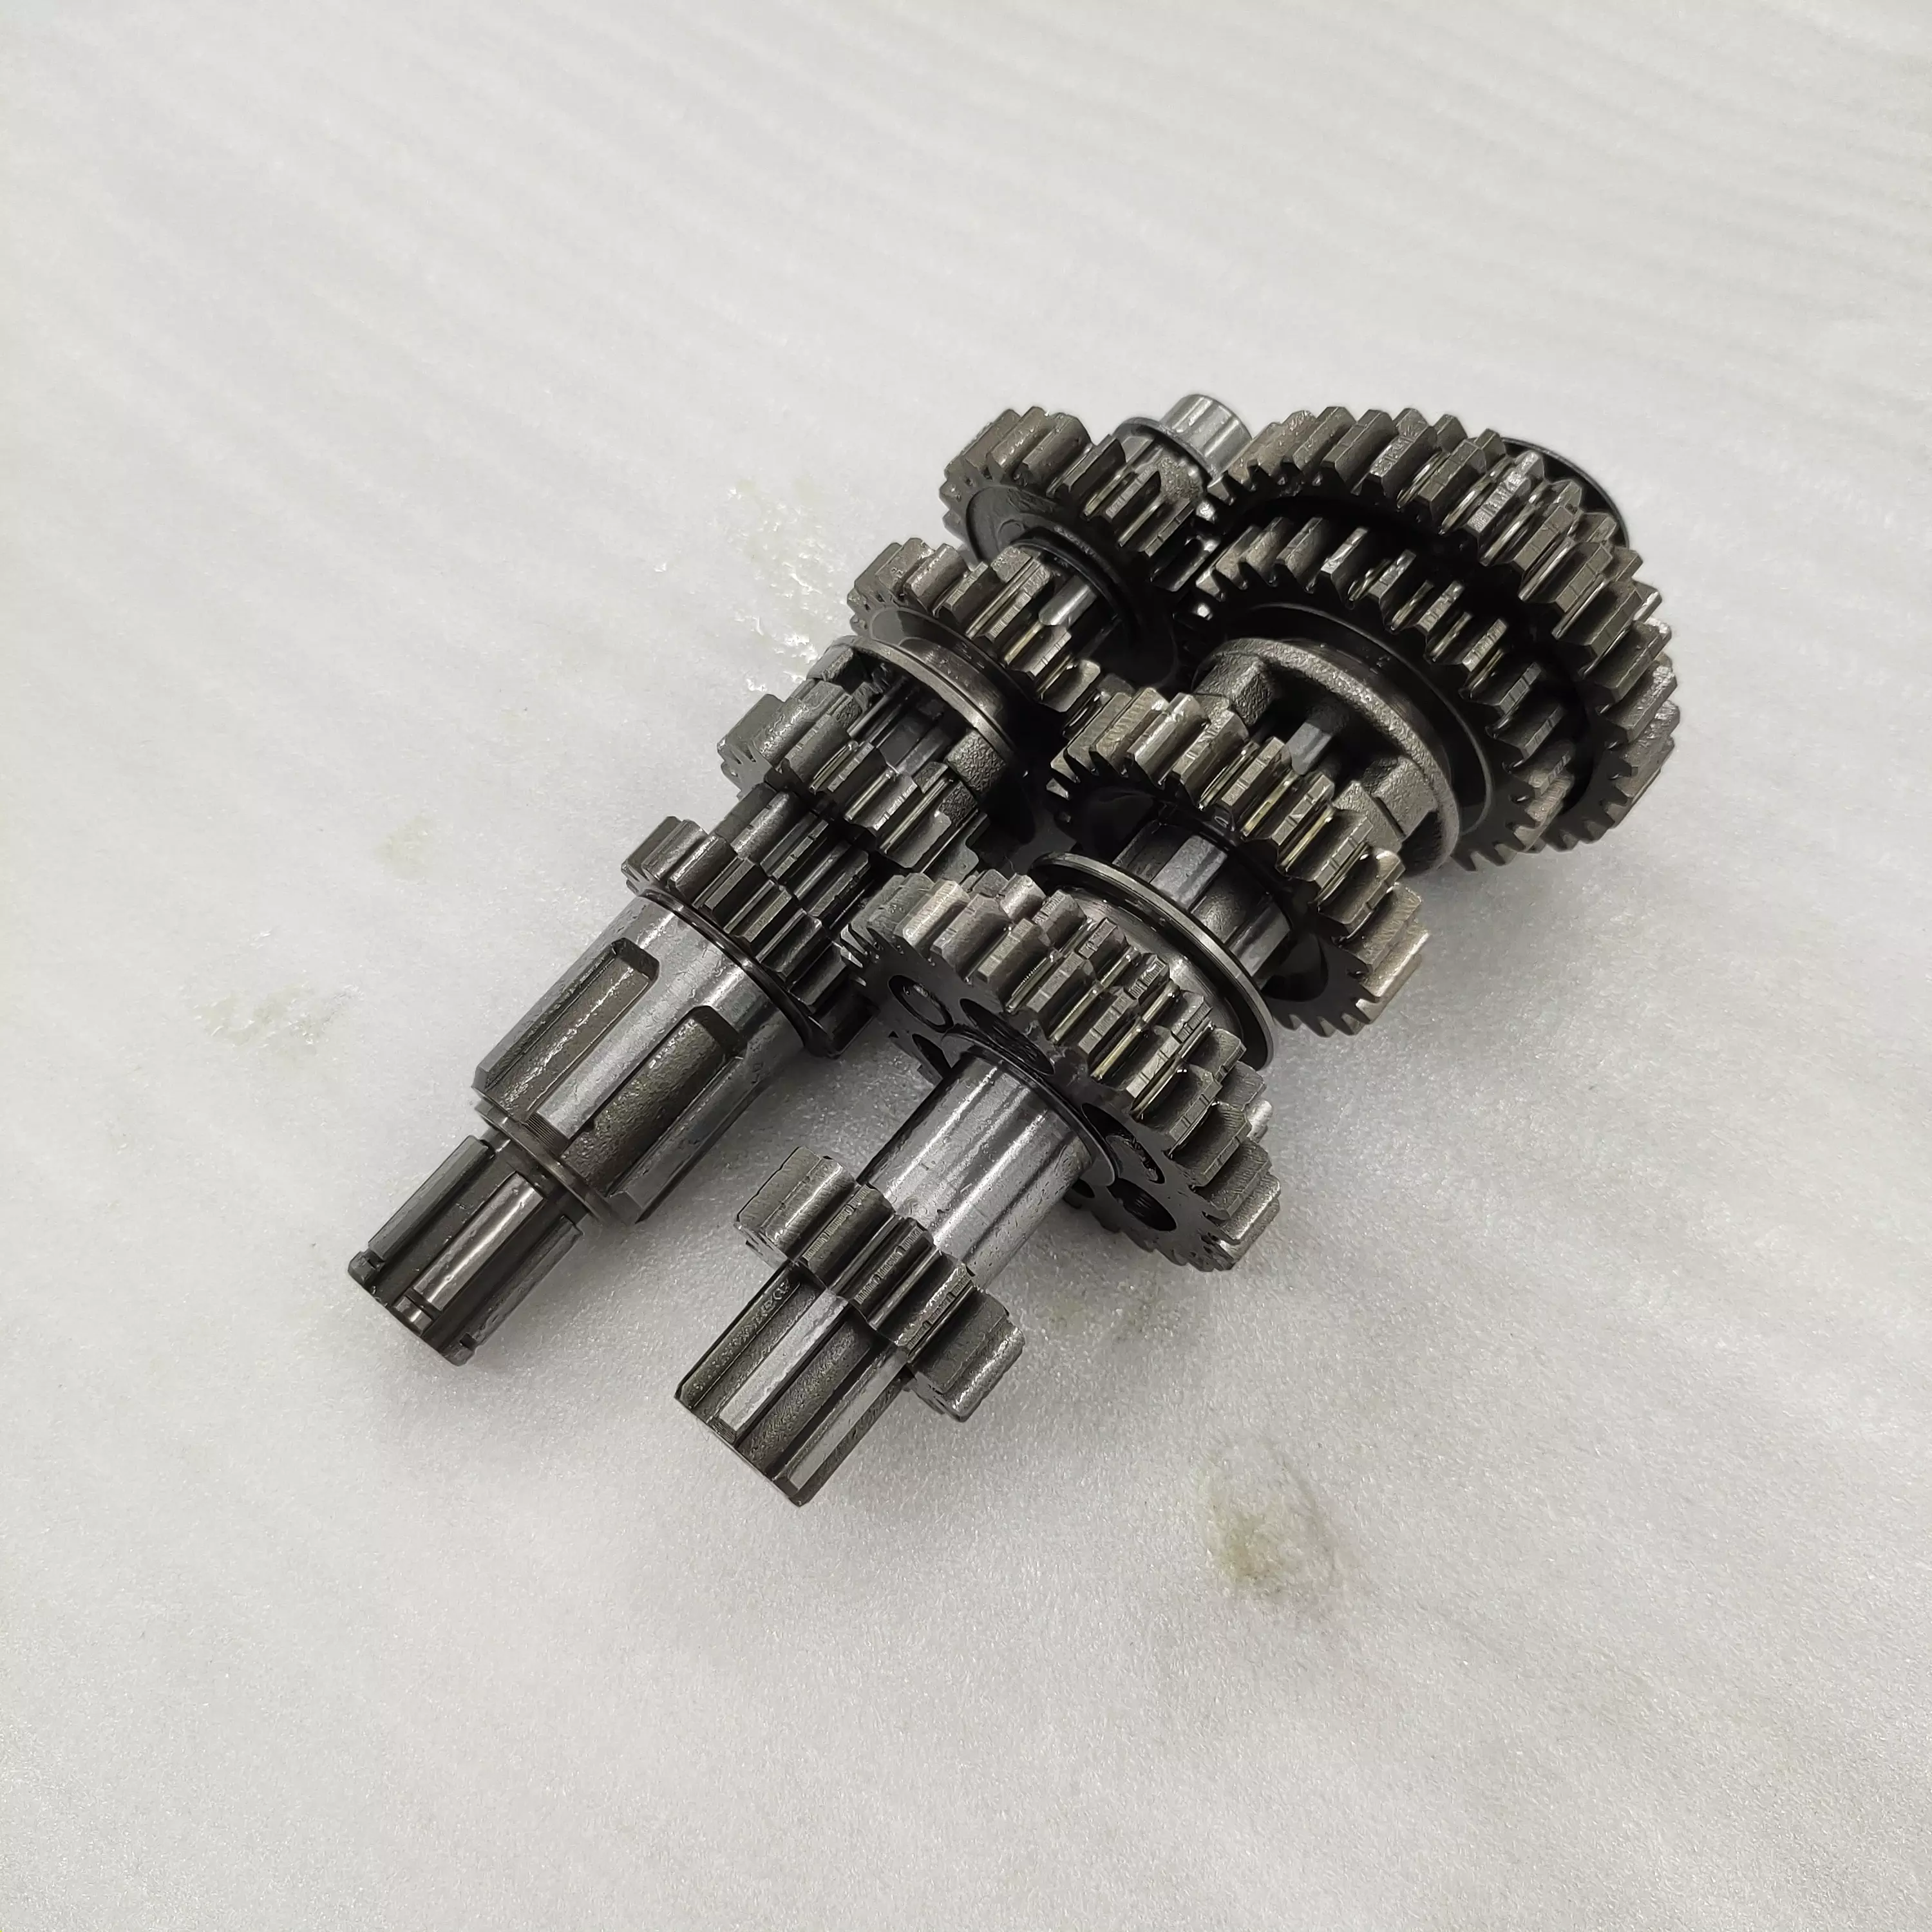 Motorcycle engine  lifan 150cc 250cc Transmission Drive Shaft Gear Engine Gear mainshaft countershaft gear bearing for tricycle